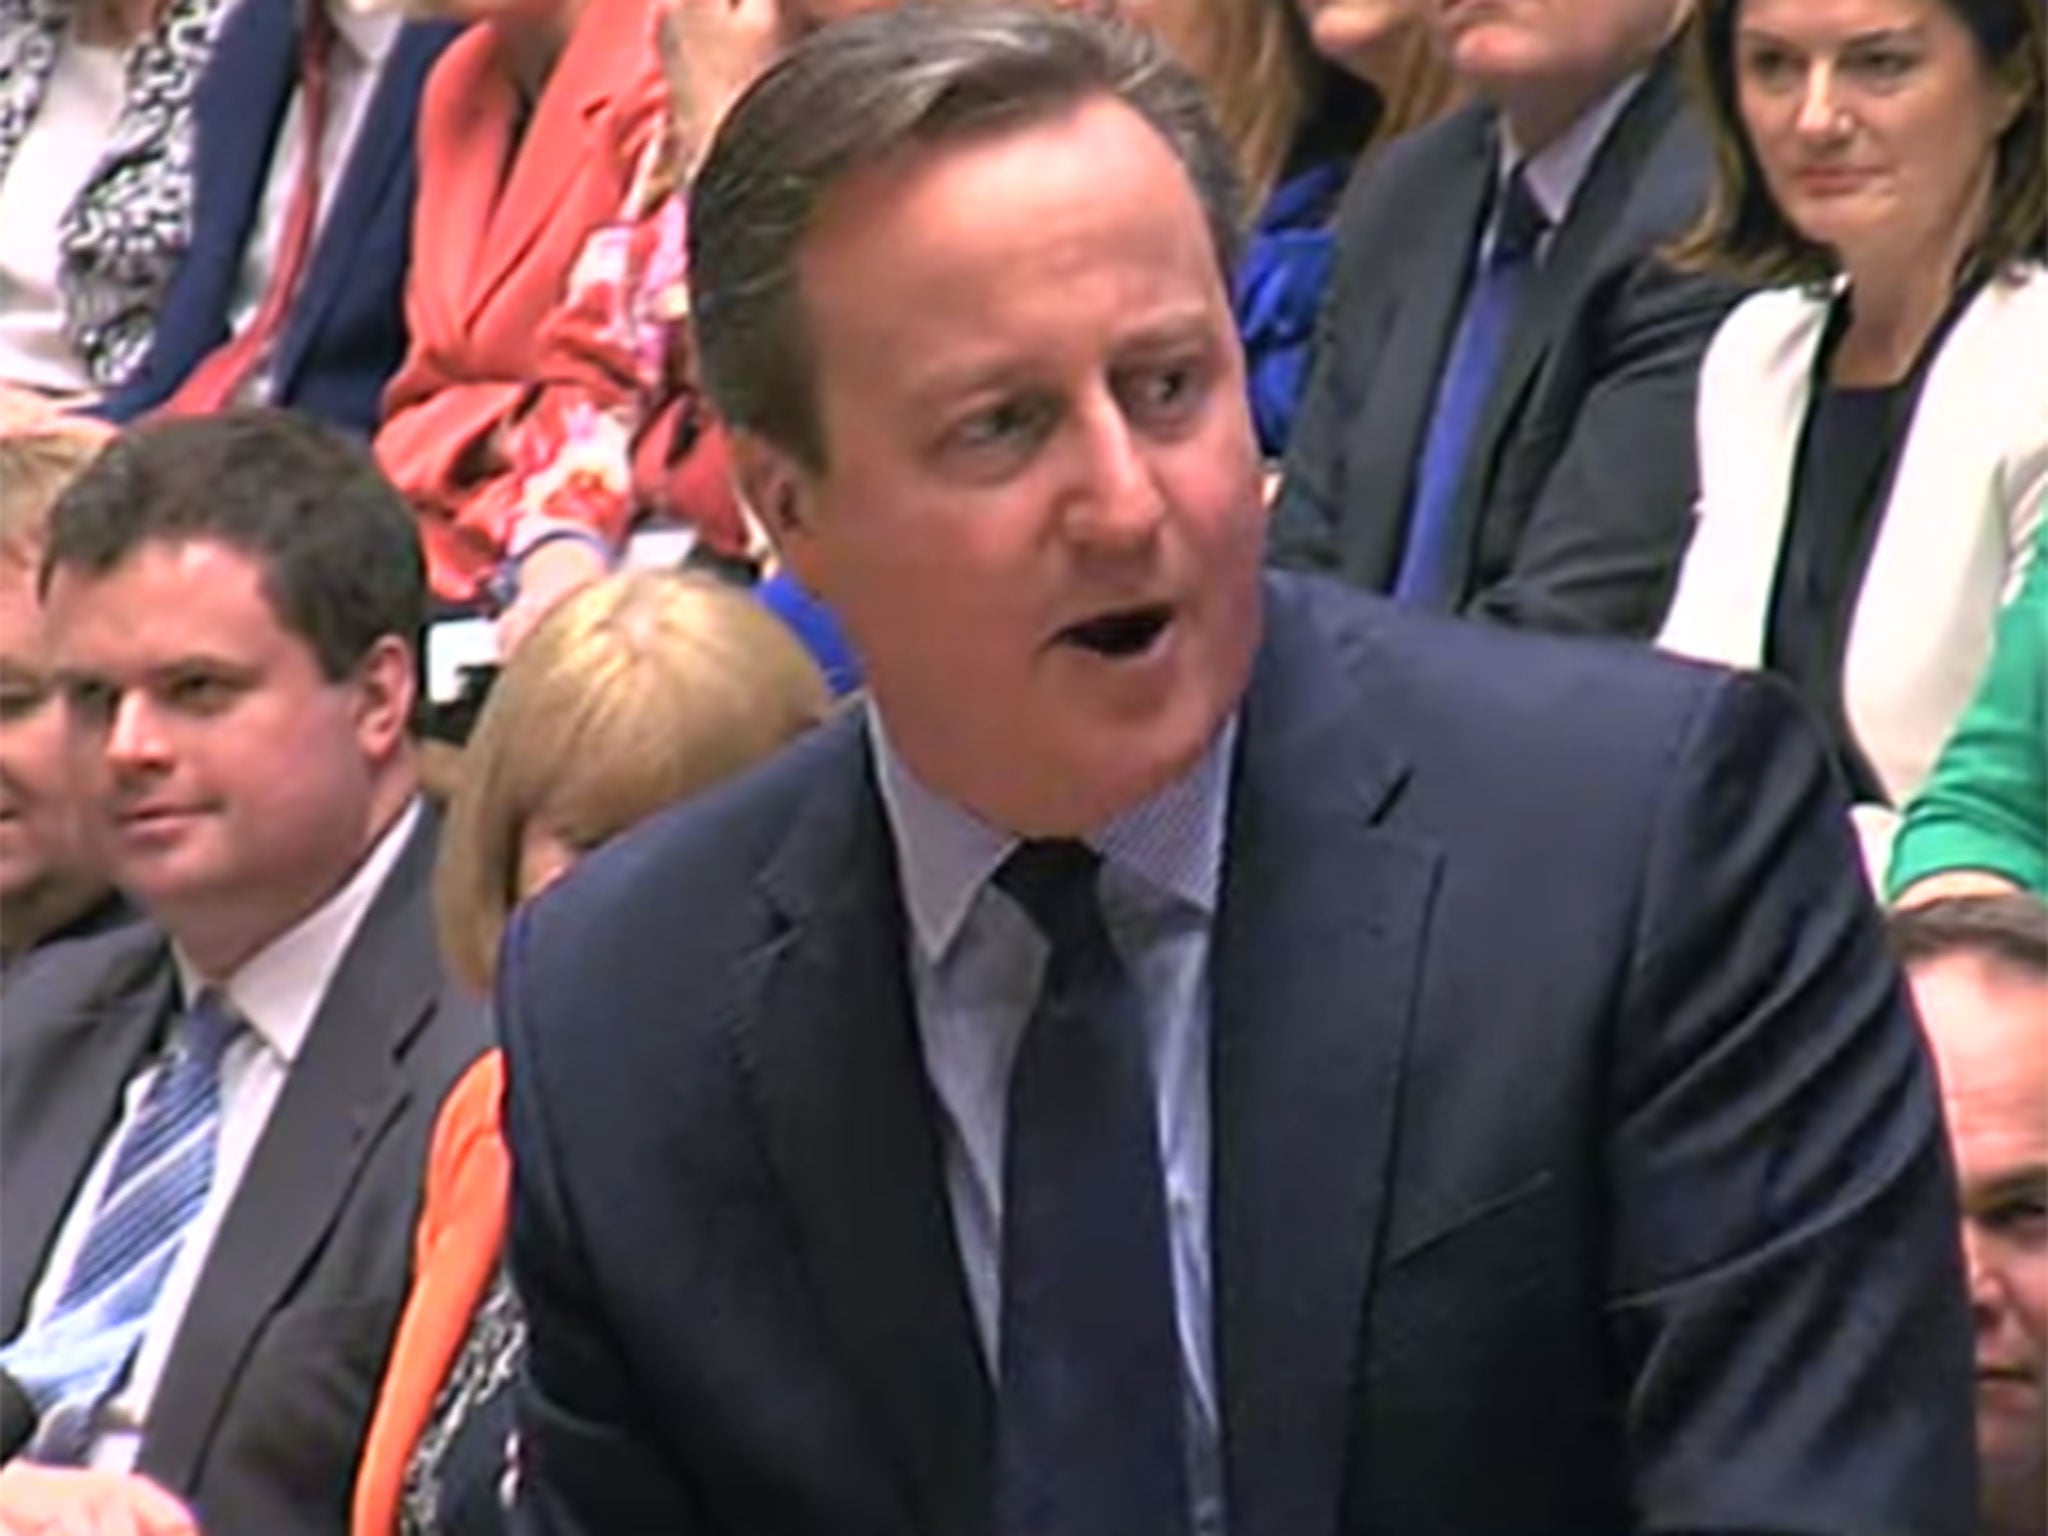 David Cameron in the House of Commons (File photo)